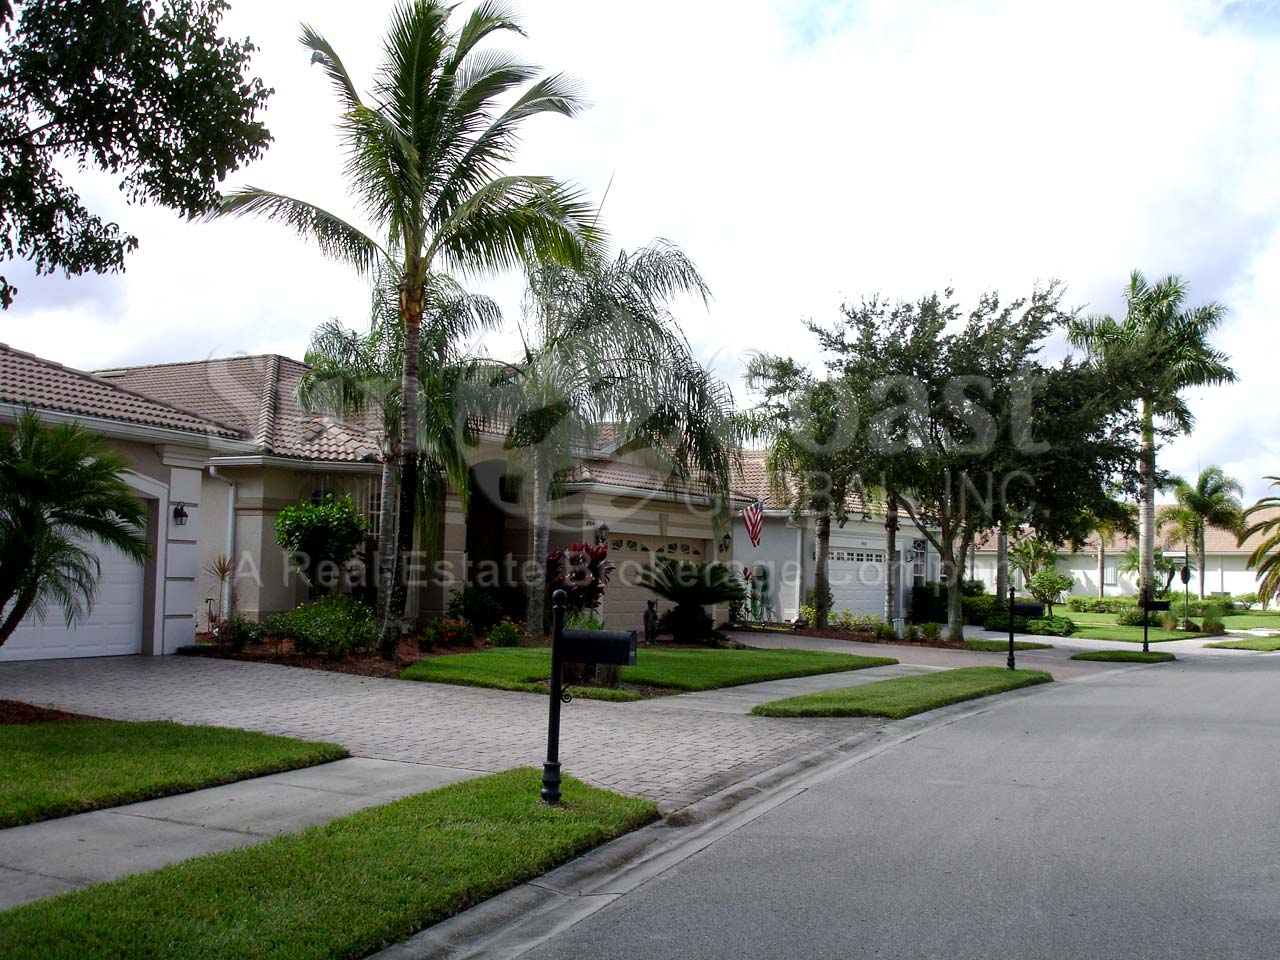 Lake Placid is a non-gated community within the gated community of Naples Lakes Country Club